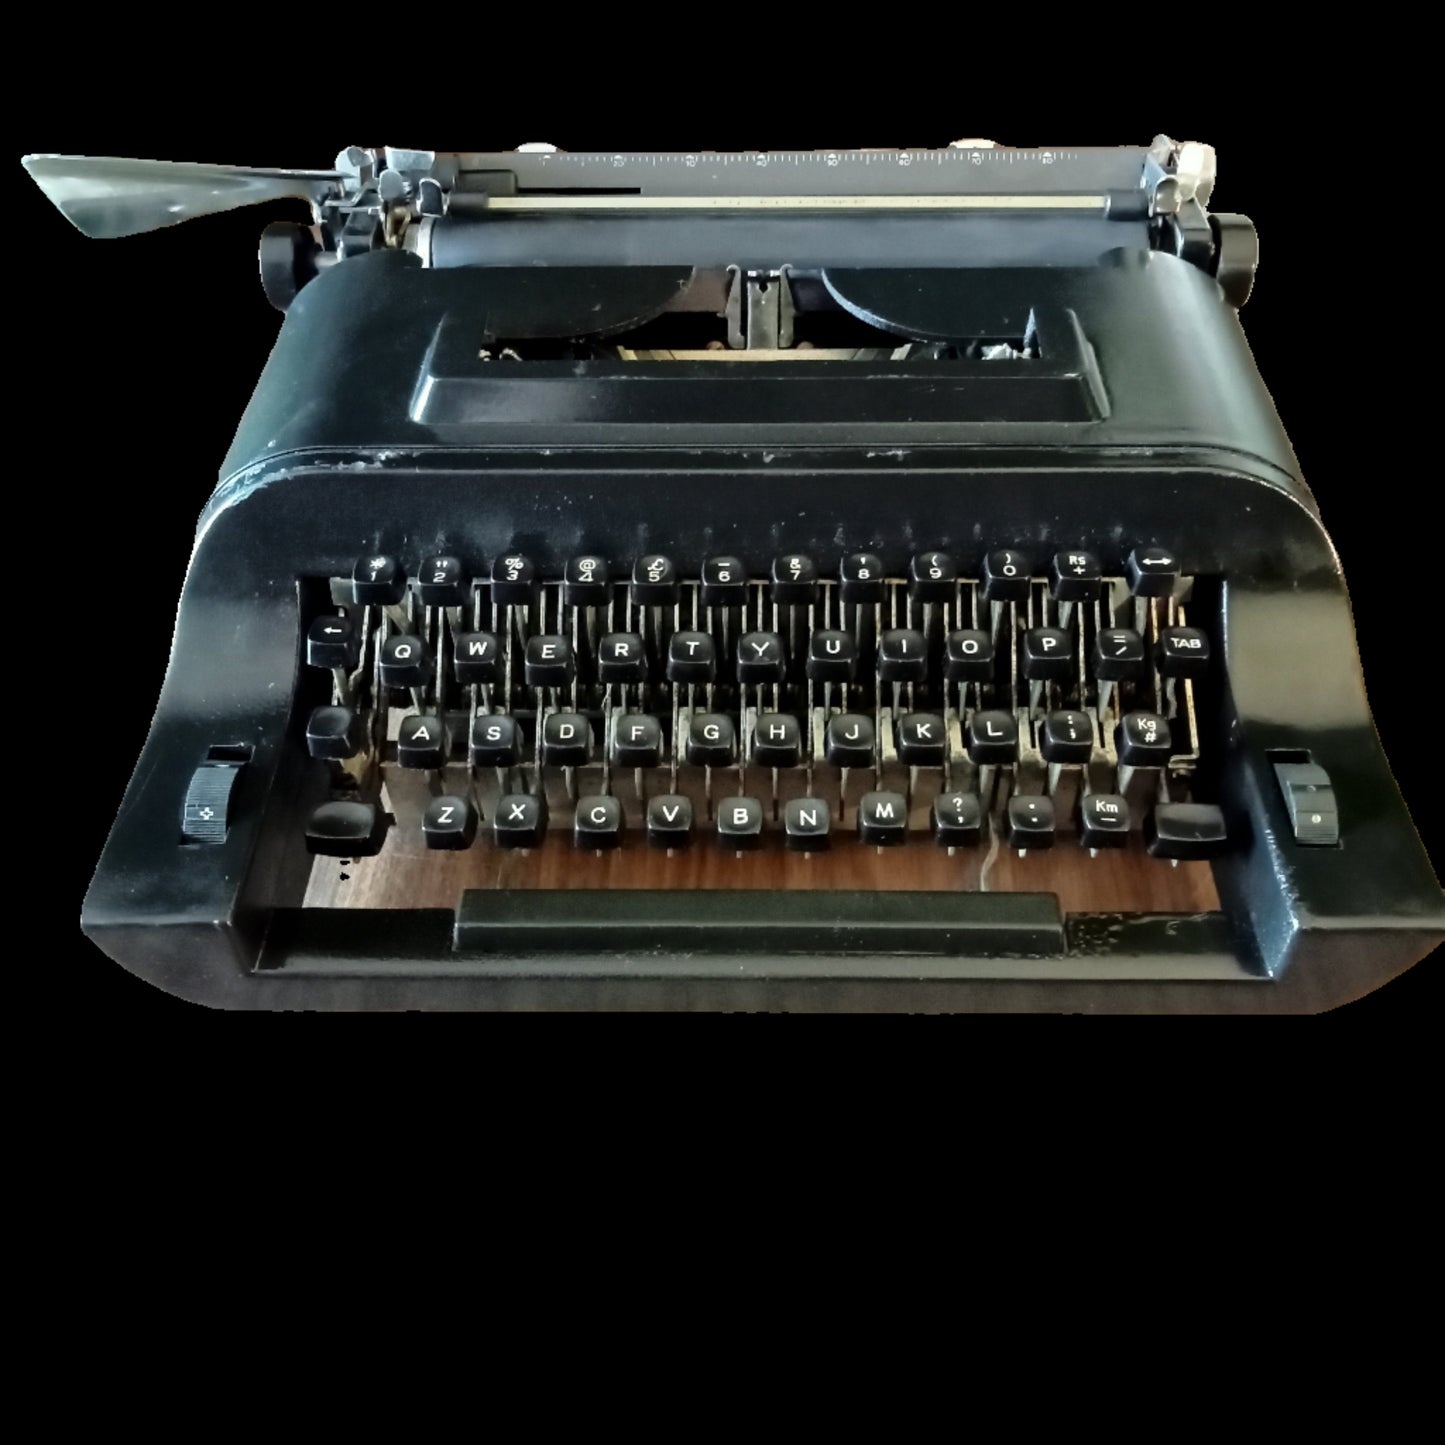 Image of Remington 20 Typewriter. Available from universaltypewritercompany.in